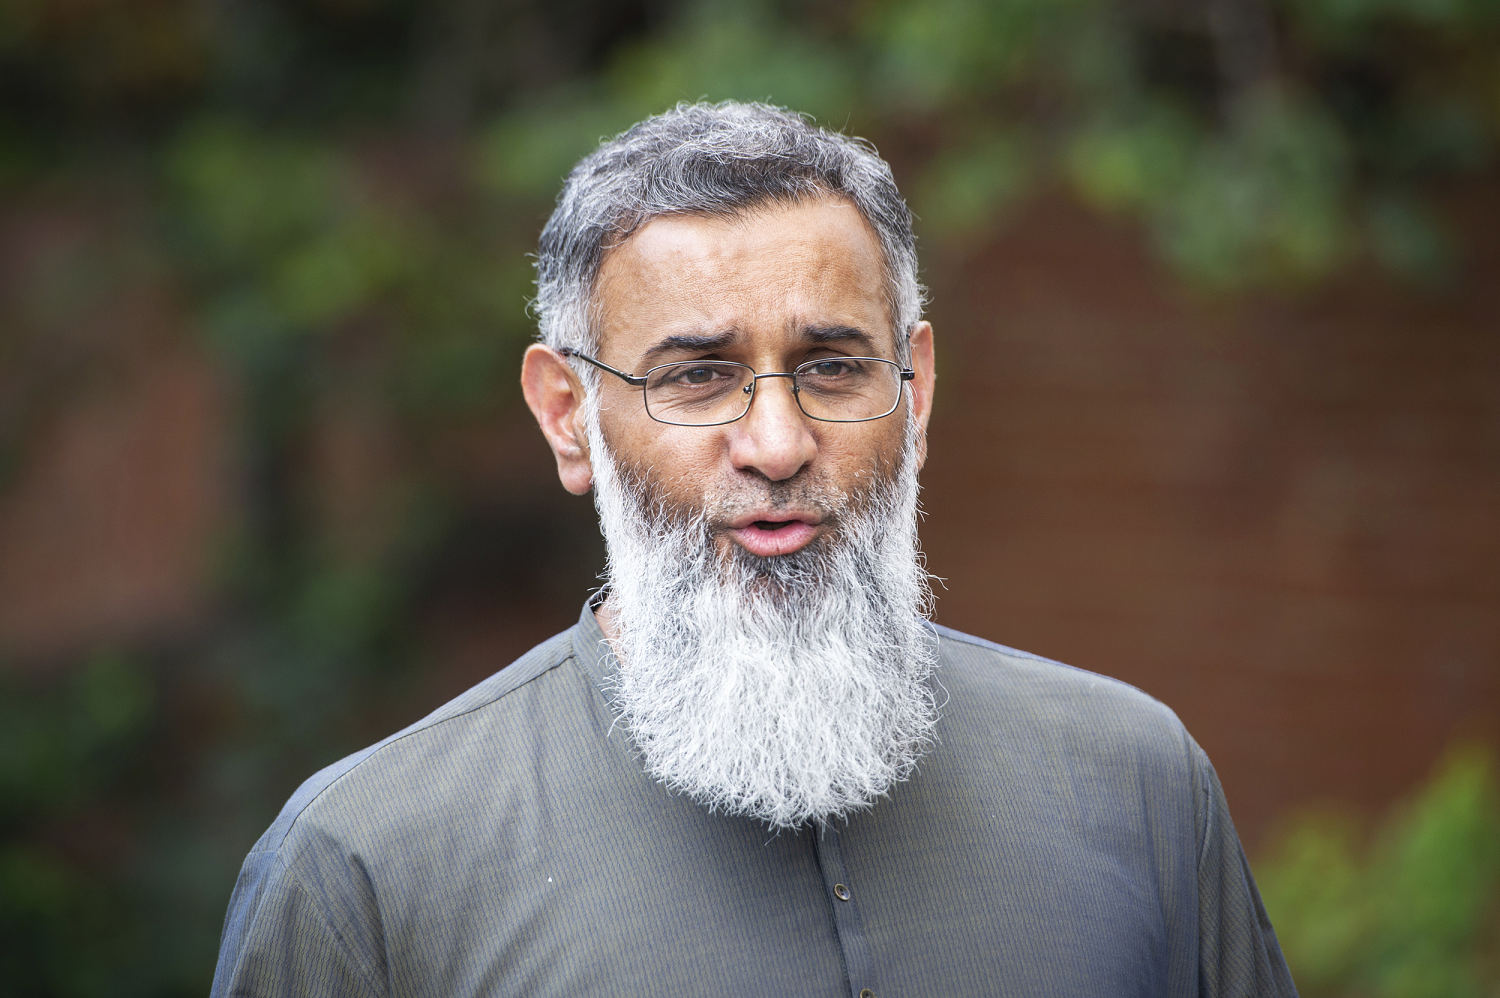 Radical British preacher Anjem Choudary sentenced to life for directing a terrorist group